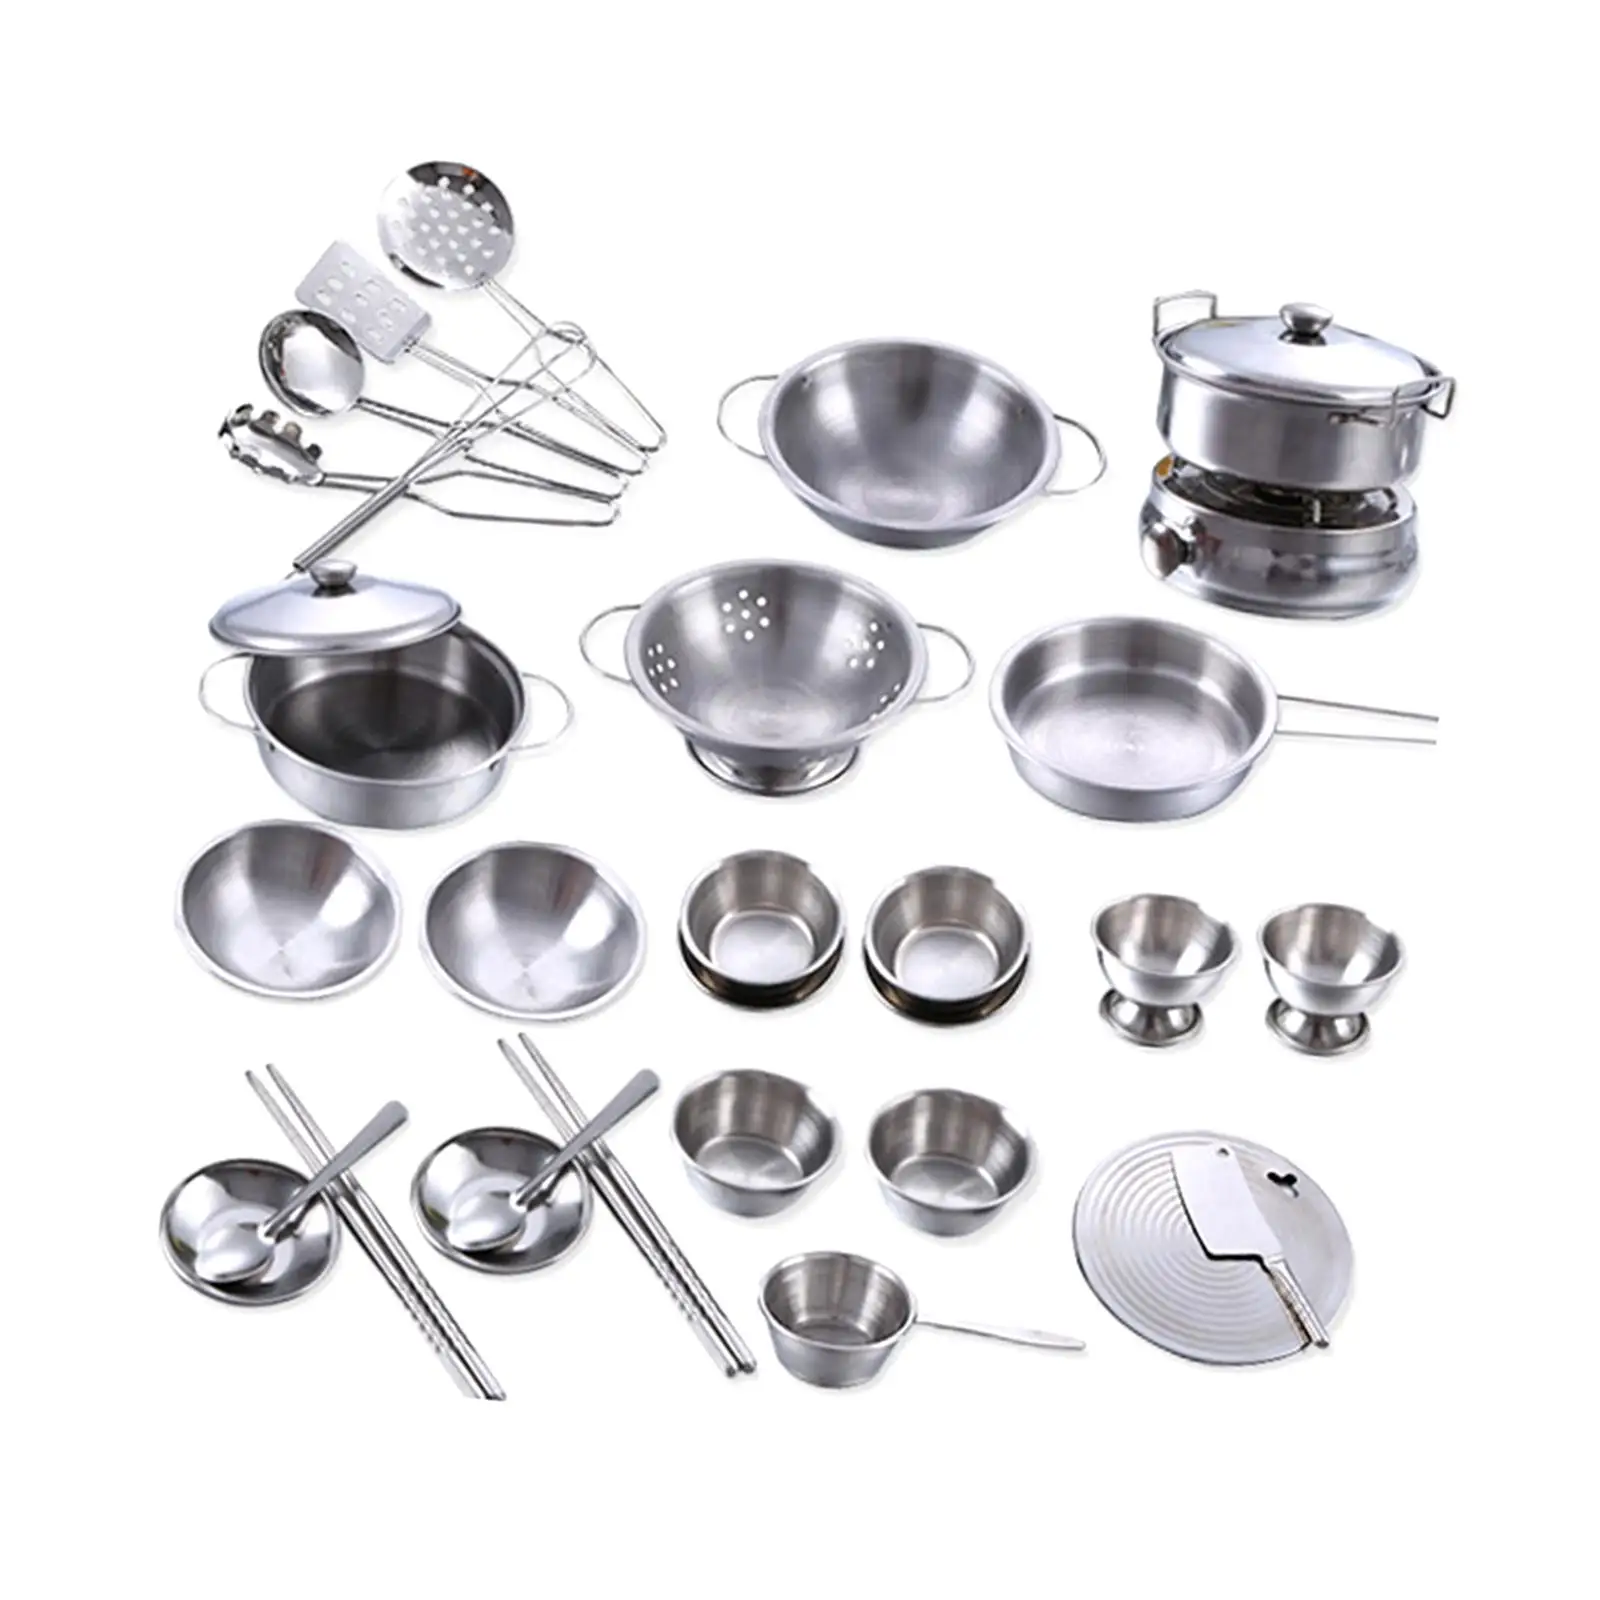 25 Pieces Kids Pretend Play Cookware Set Kitchen Toys for Child Realistic